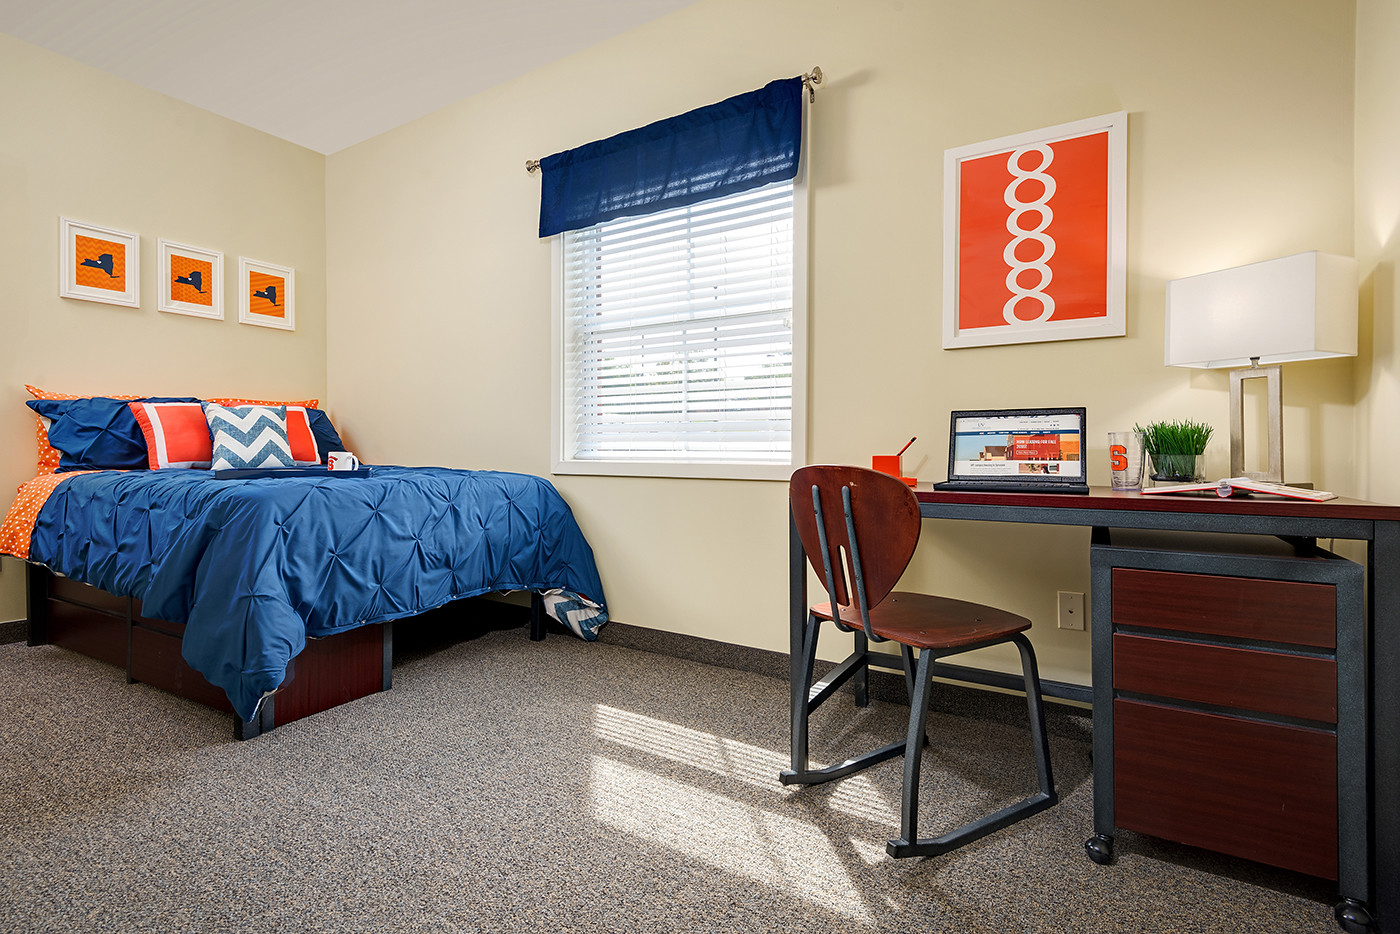 7 Tips To Help You Find Off Campus Apartments Quickly Nature World News 2722